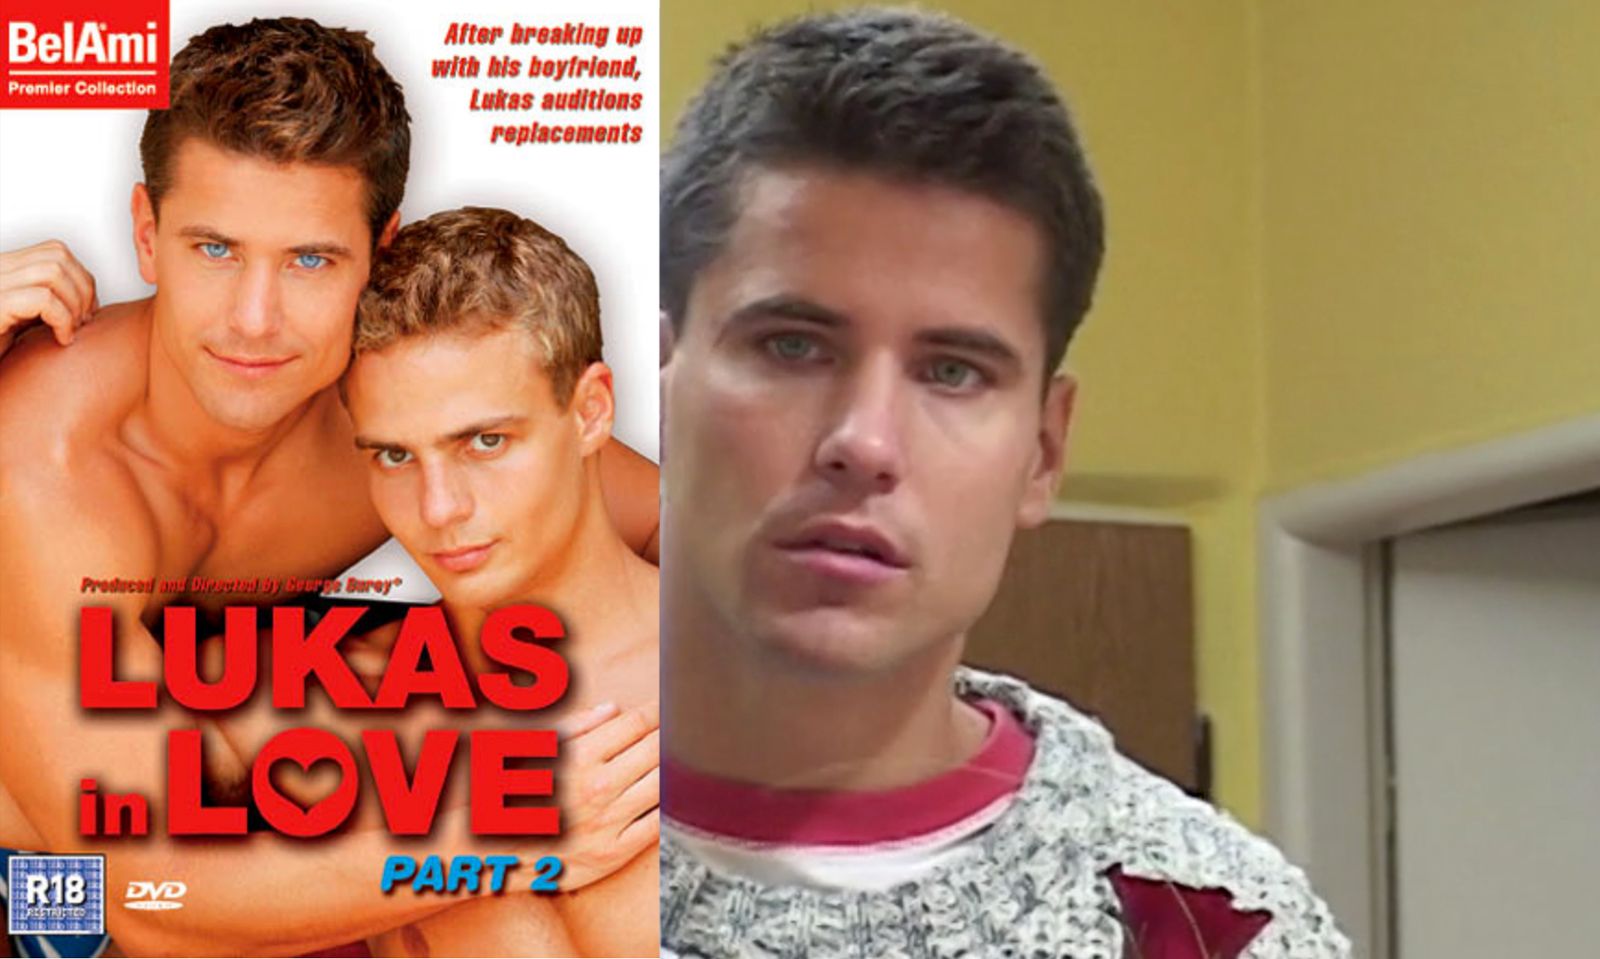 BelAmiOnline Releases Remastered 'Lukas in Love'